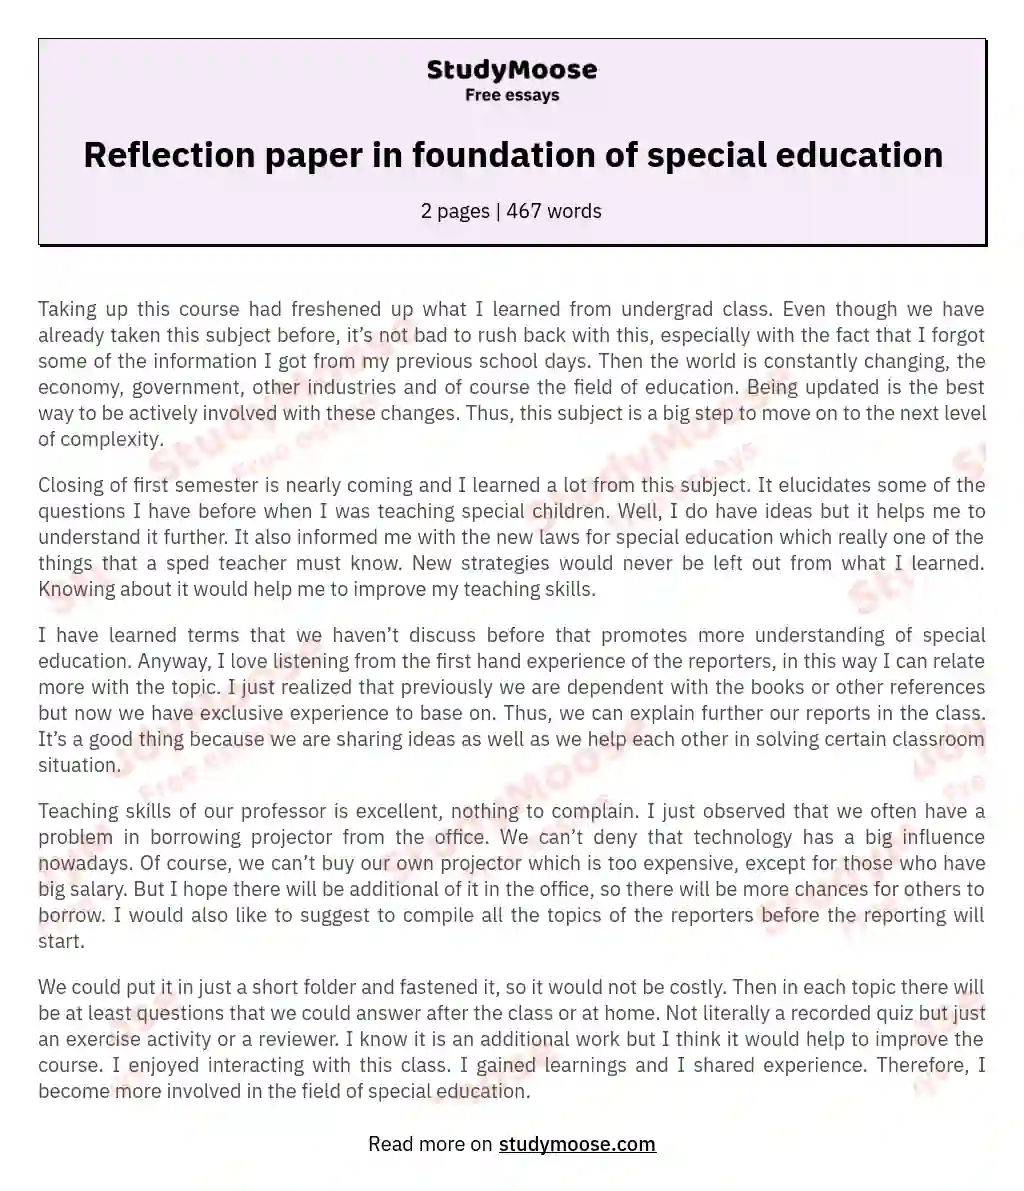 Reflection paper in foundation of special education essay